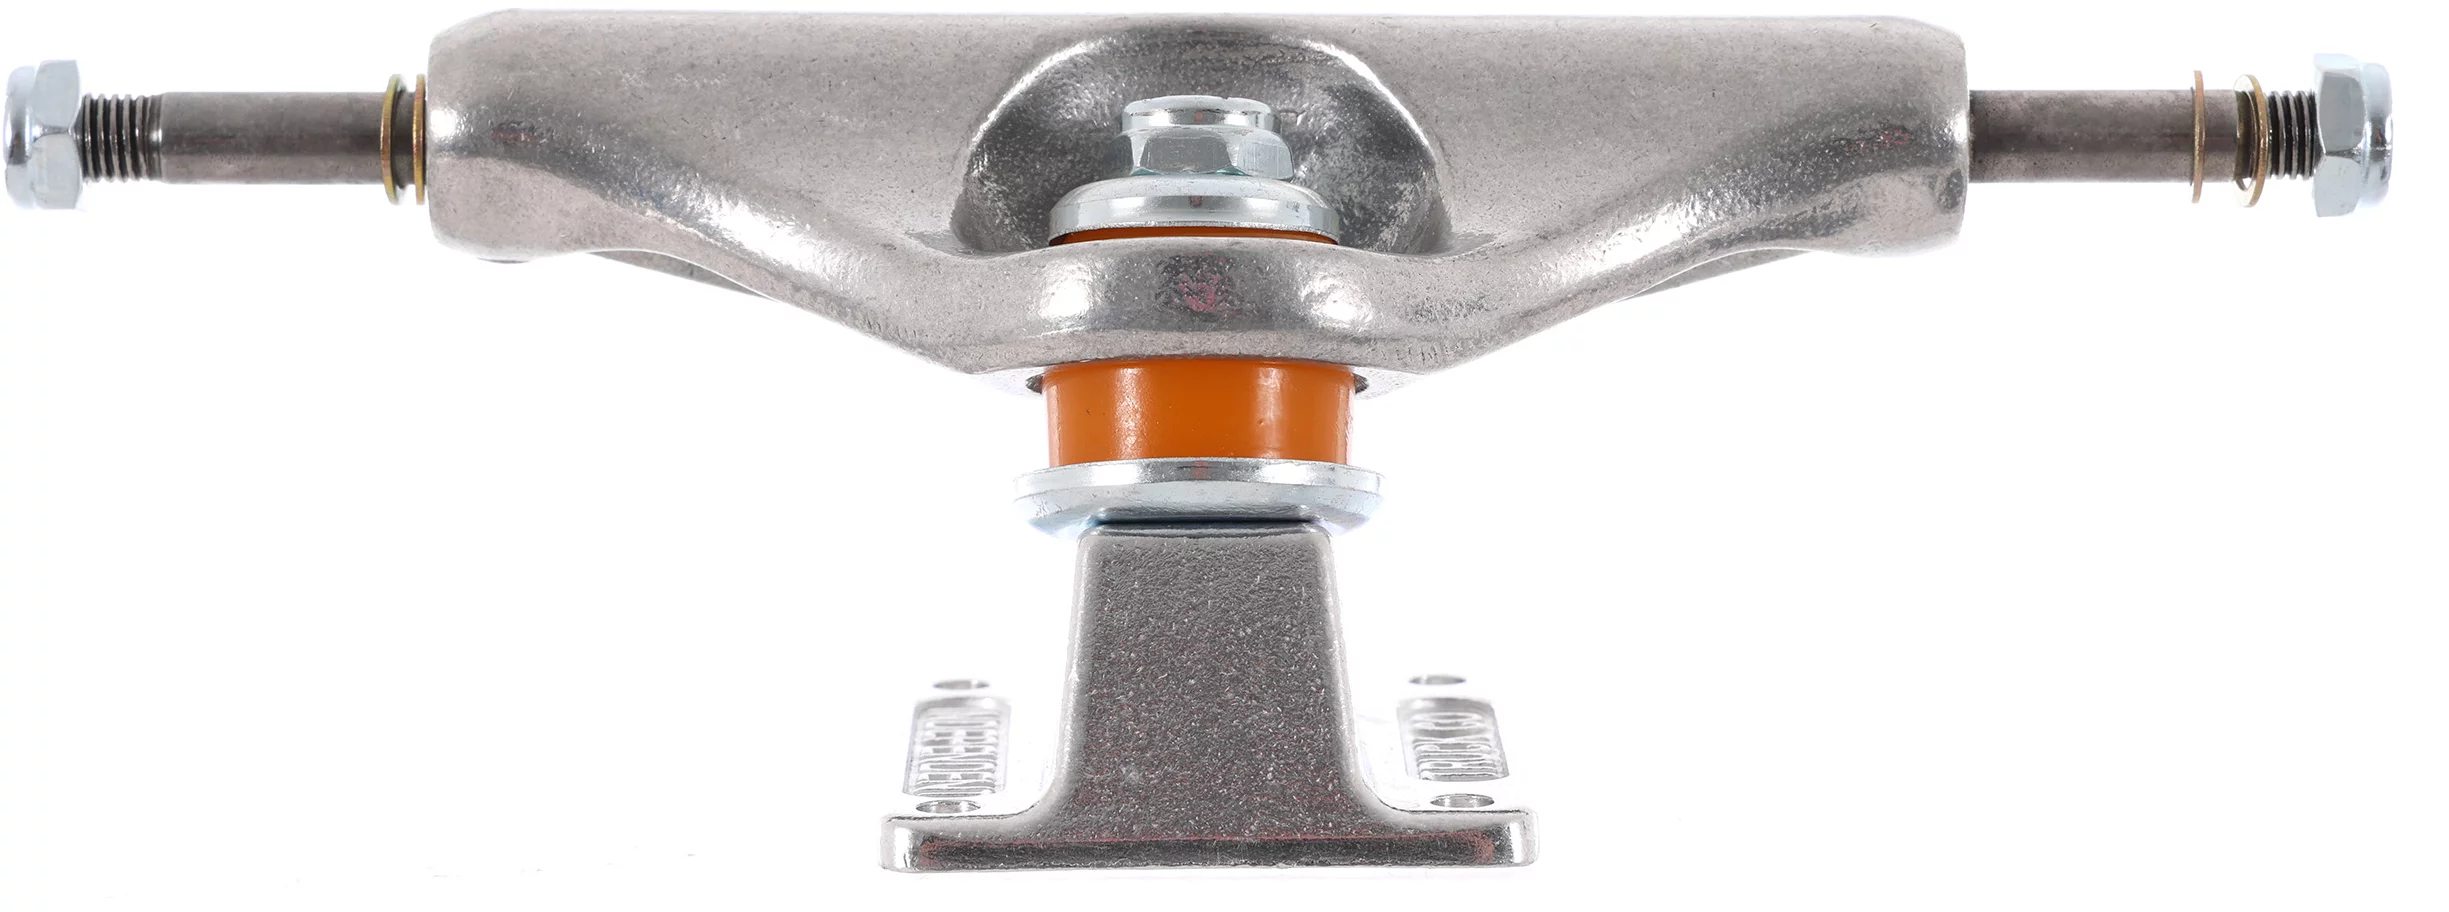 Independent Forged Hollow Stage 11 Skateboard Trucks - silver 144 